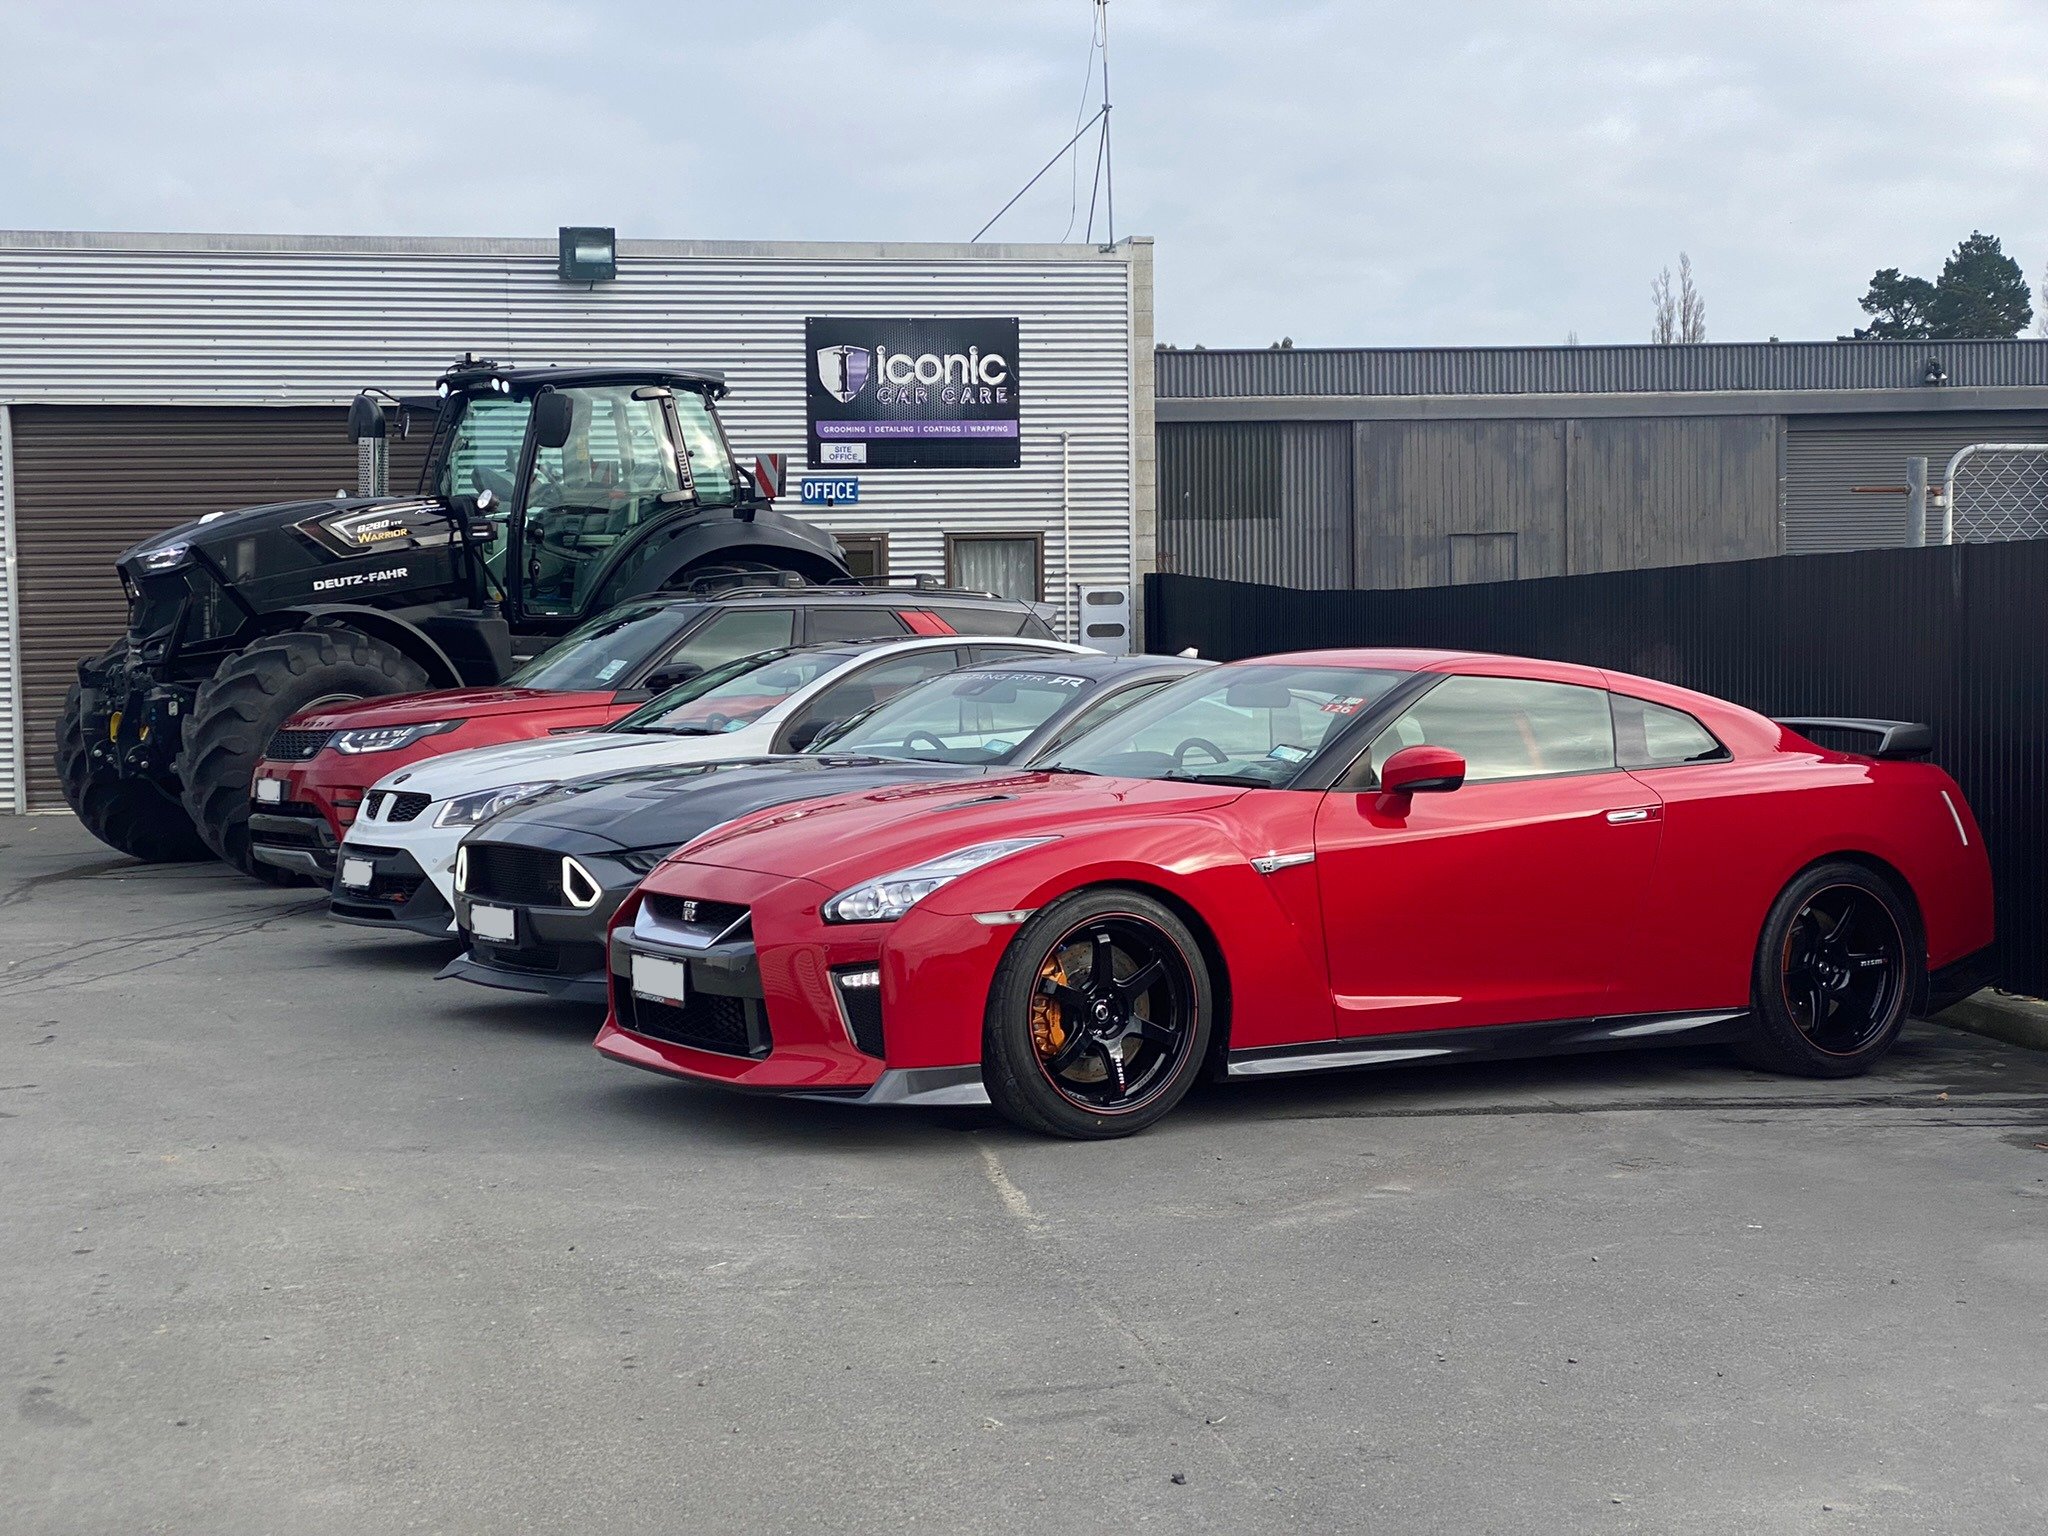 Protect your paint like a secret agent with our ceramic coatings. License to shine, anyone?😎

https://iconiccarcare.co.nz/ceramic-coatings-protection

🛡Iconic, Your Premium Partner in Car Care🛡
📞027 333 3687📞
📧welcome@iconiccarcare.co.nz📧
🏠14